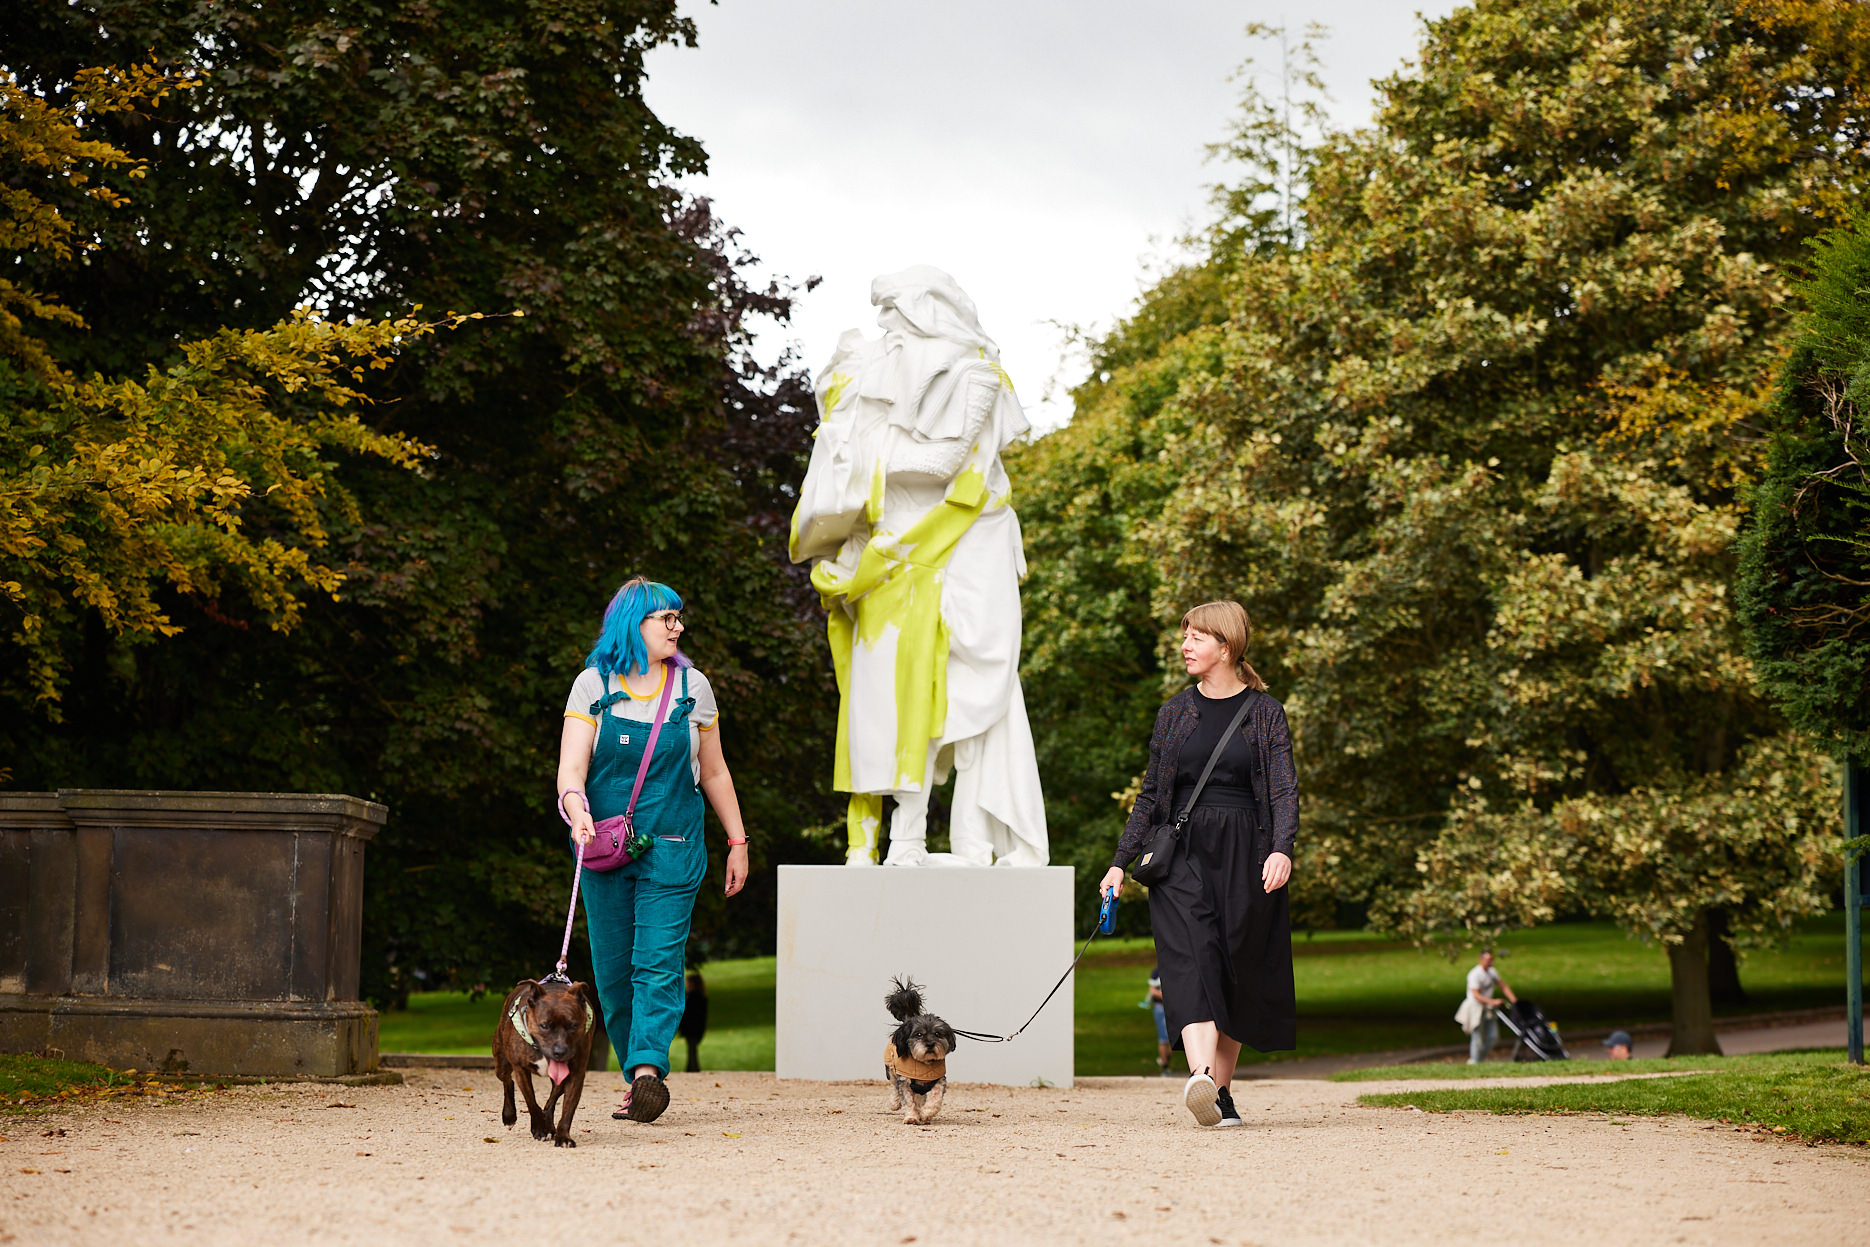 Two women walking dogs on leads past a tall white human-shaped sculpture